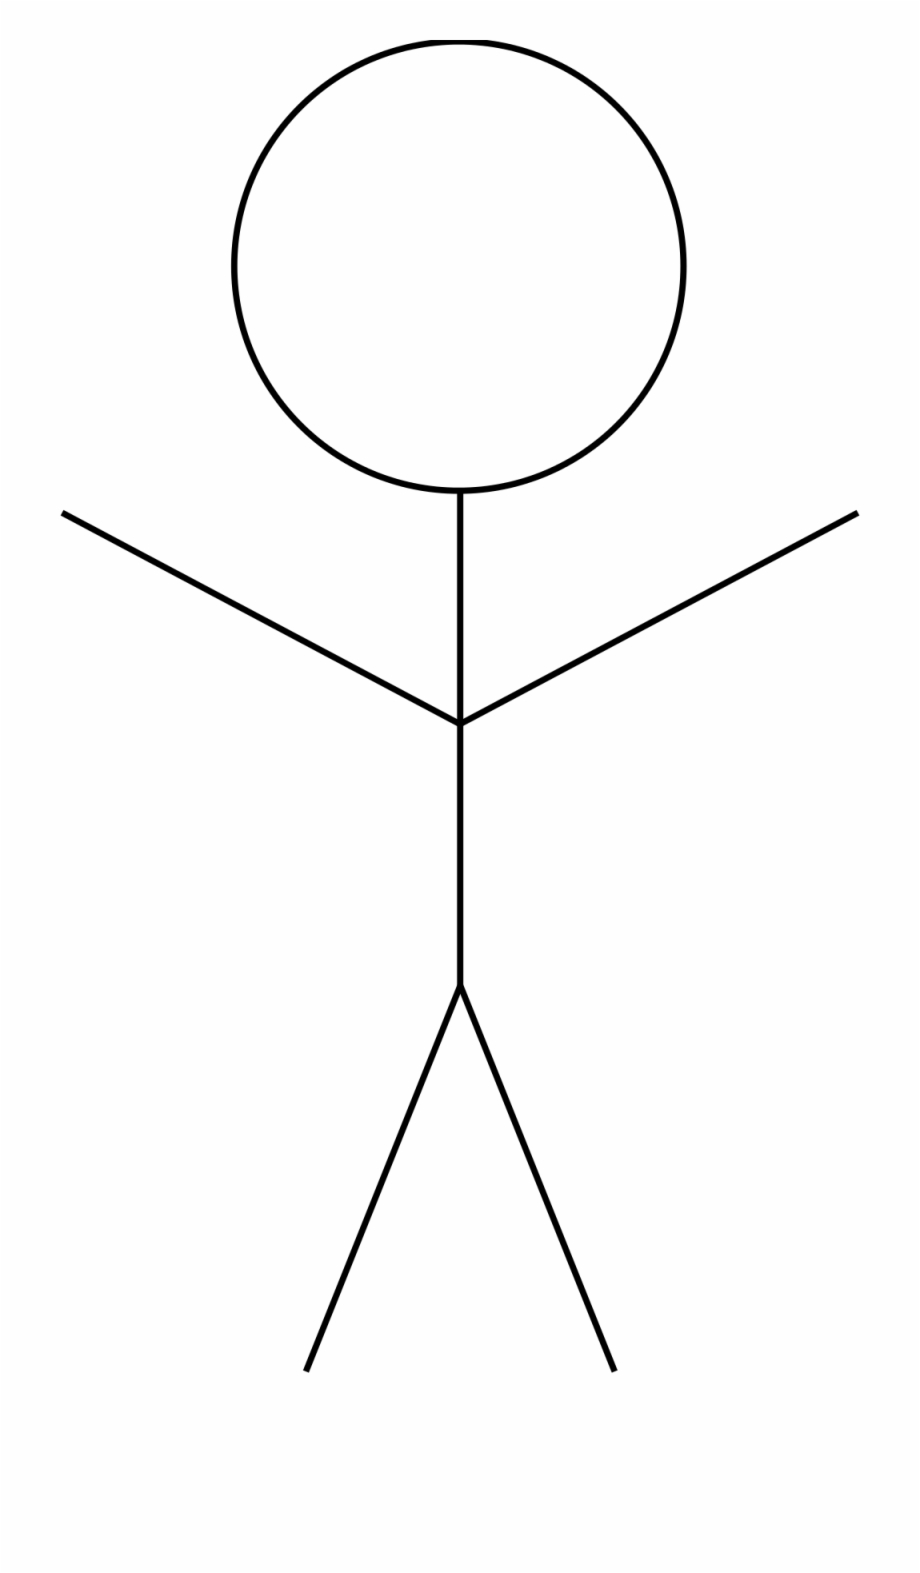 Download High Quality stick figure clipart black and white Transparent